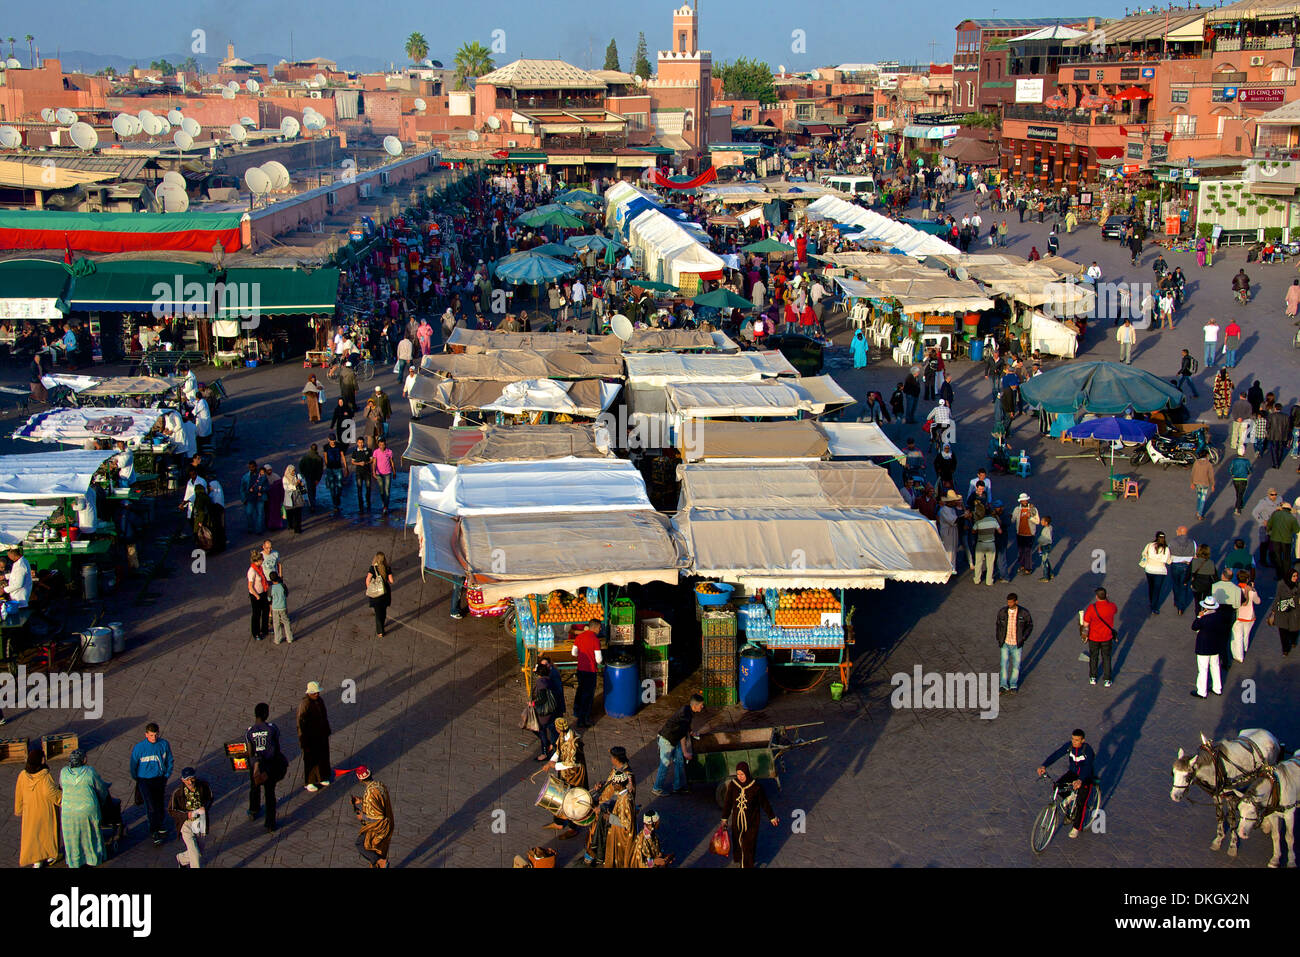 Restaurants, terraces, Kharbouch mosque and minaret, Jemaa-el-Fna Square, Marrakech, Morocco, North Africa, Africa Stock Photo